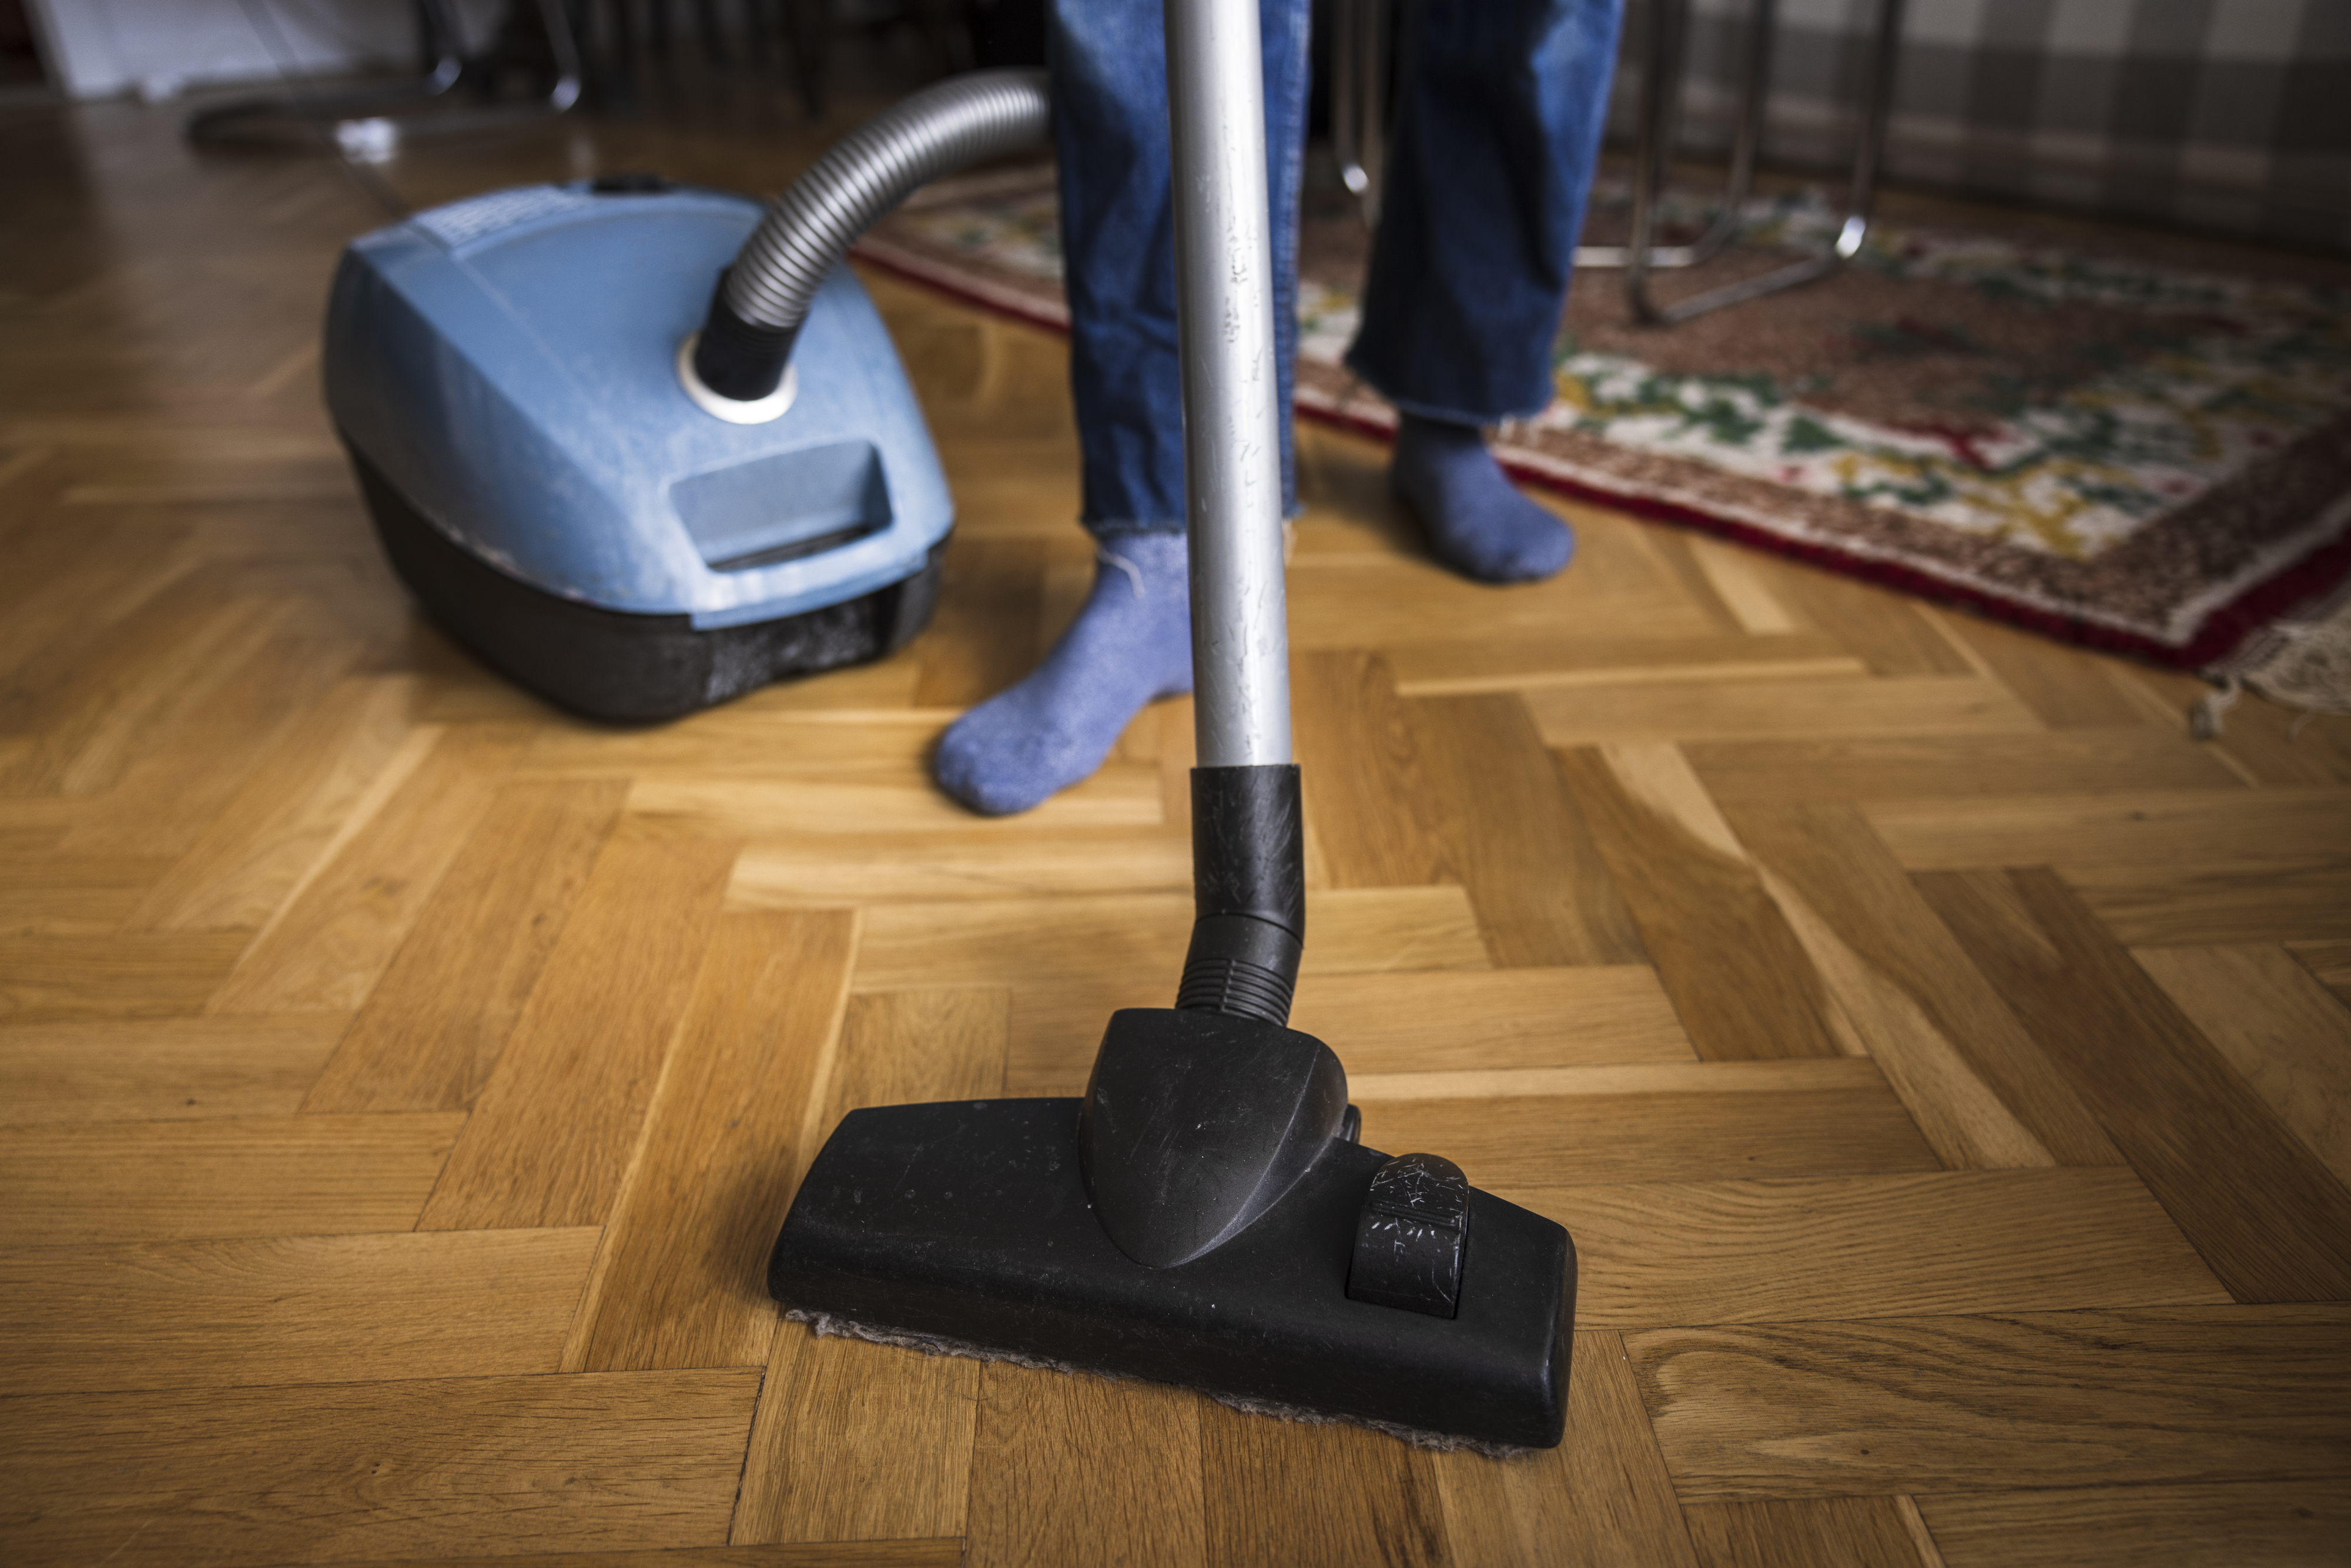 A person wearing blue socks vacuuming a wooden floor with a canister vacuum